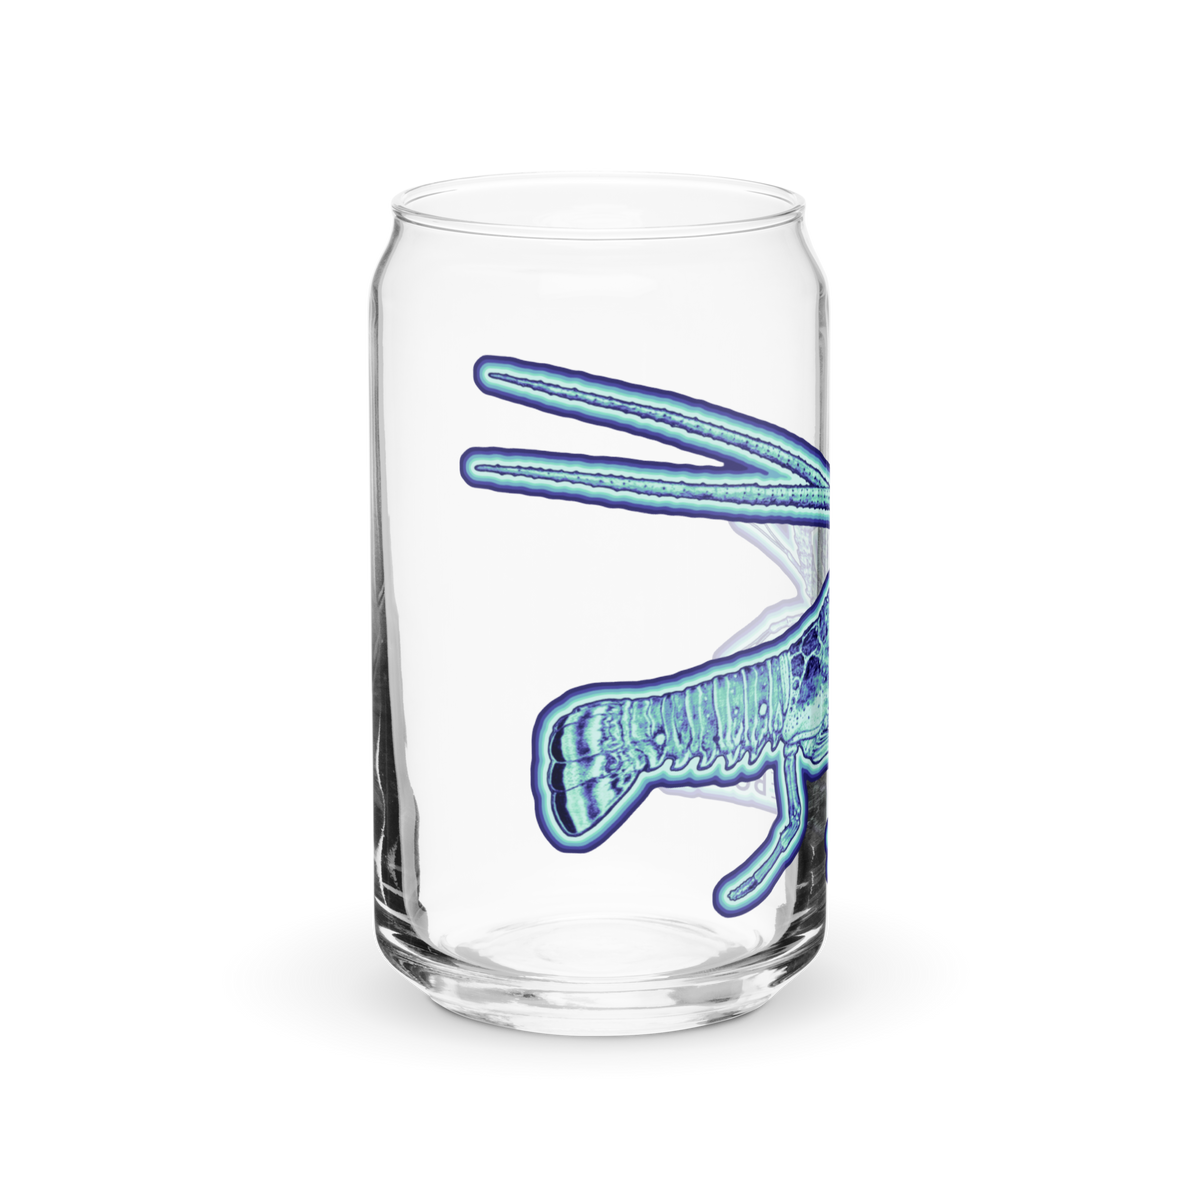 Spiny Lobster in &#39;Florida Teal&#39; Glassware - Shaker Pint Glass or Vintage Can Glass